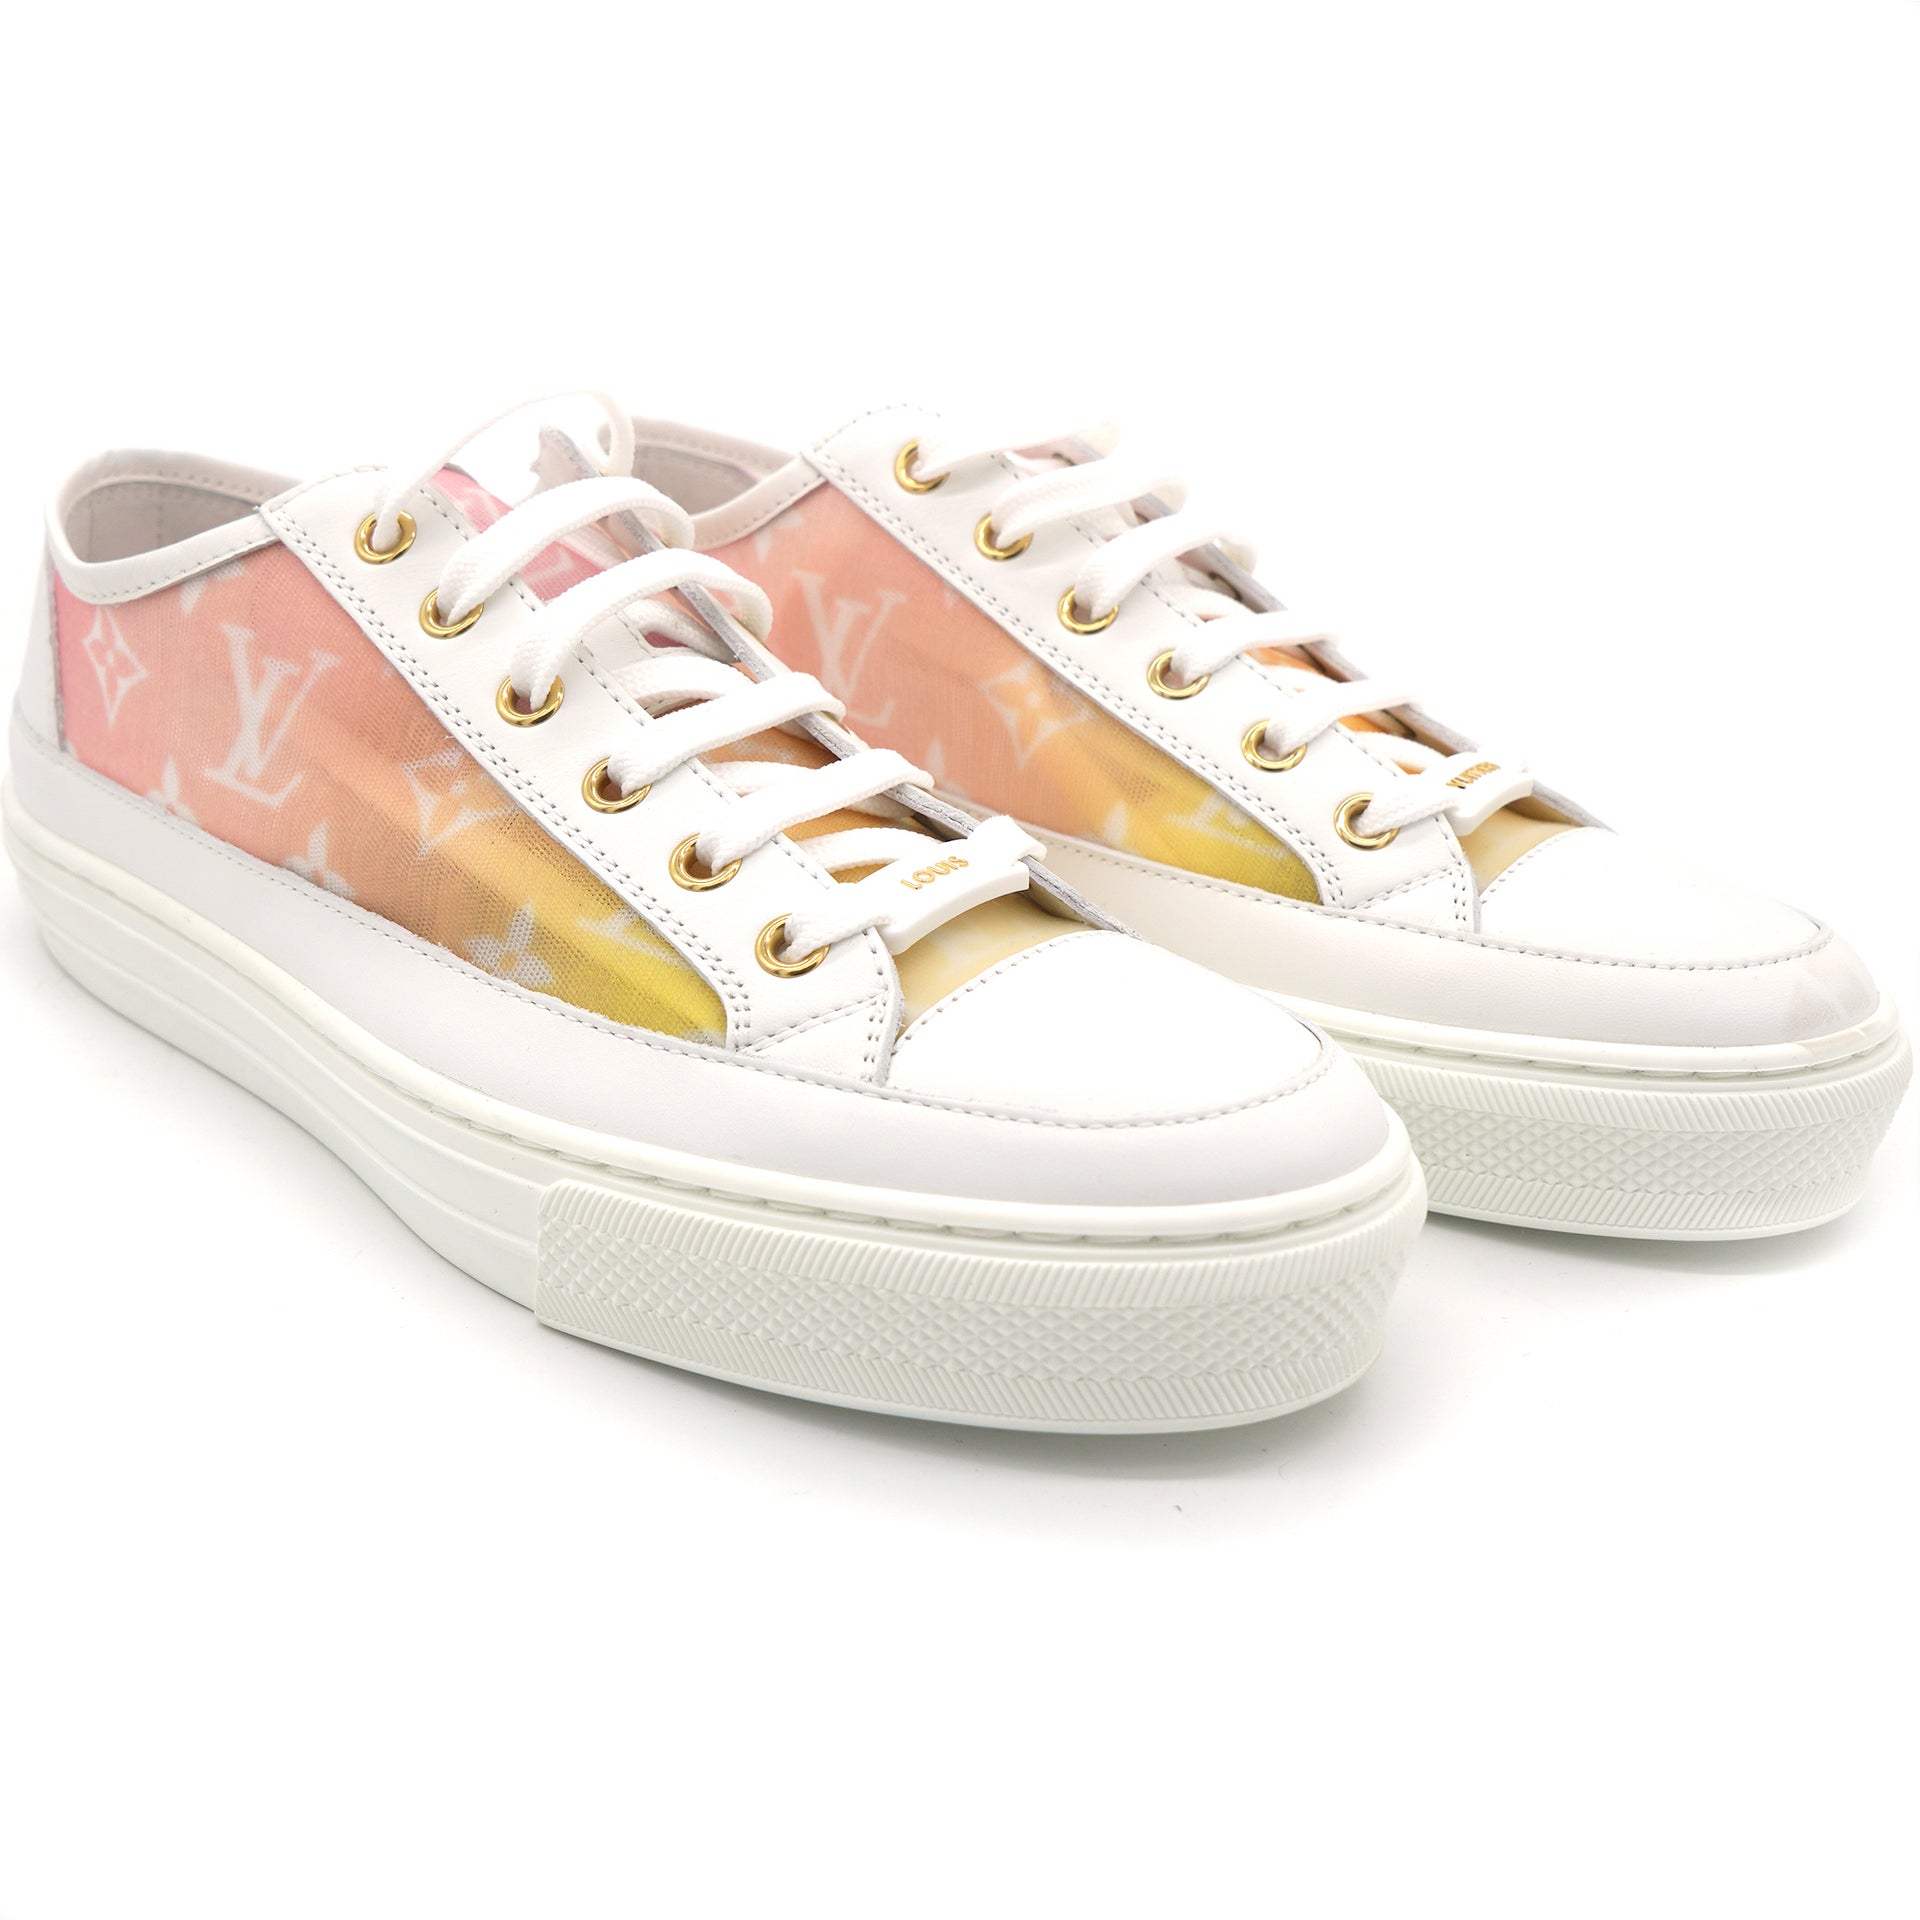 Pink/Yellow Monogram Mesh and Leather Low Top Sneakers 38.5